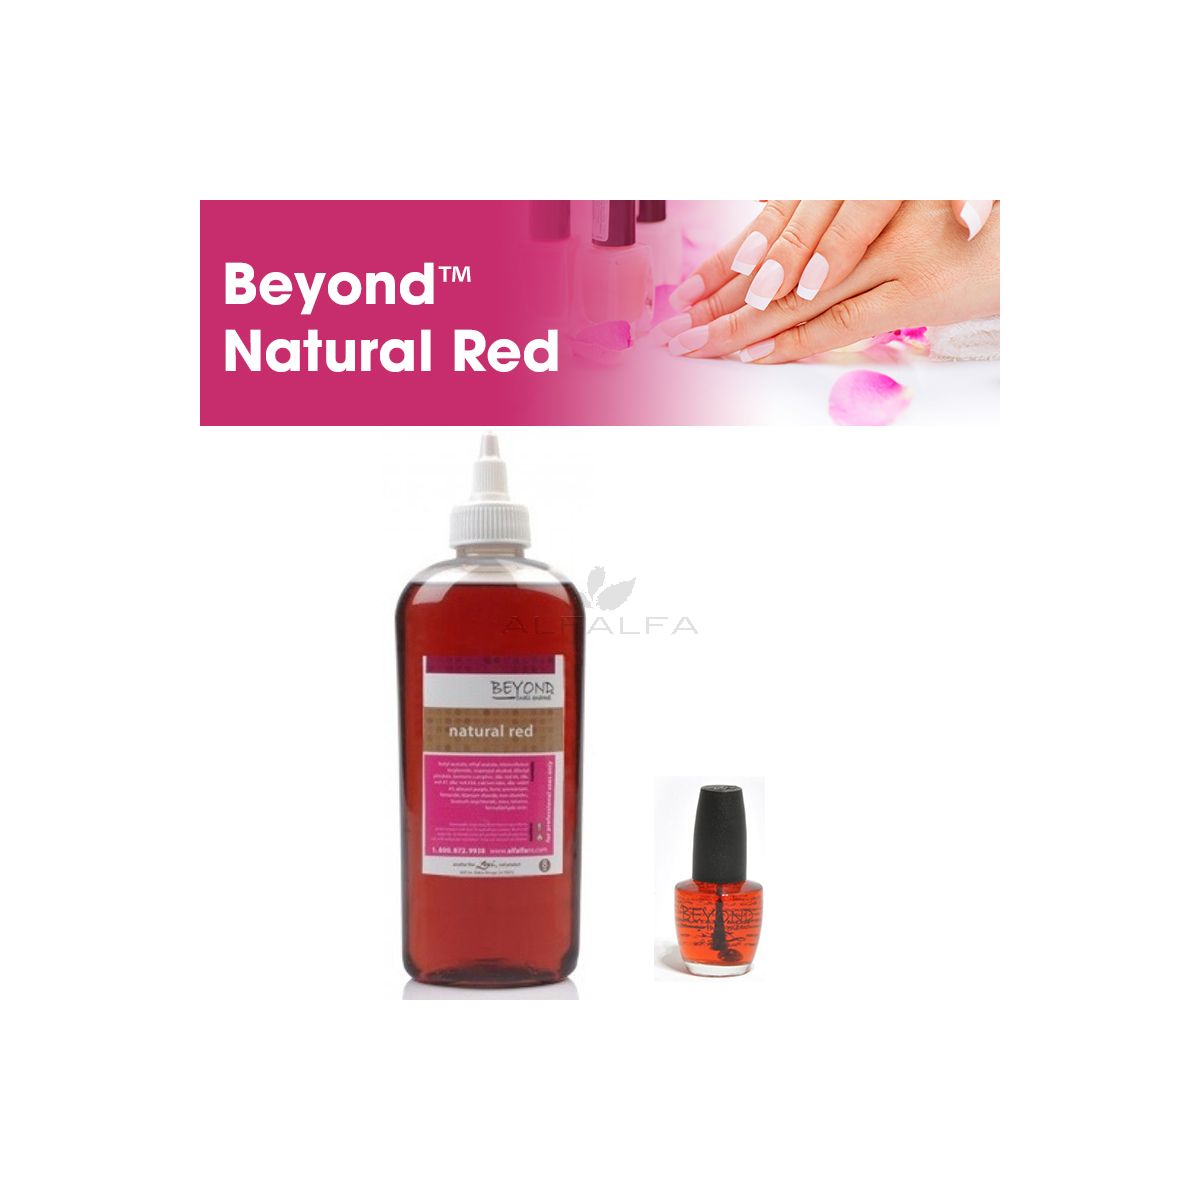 Beyond Natural Red